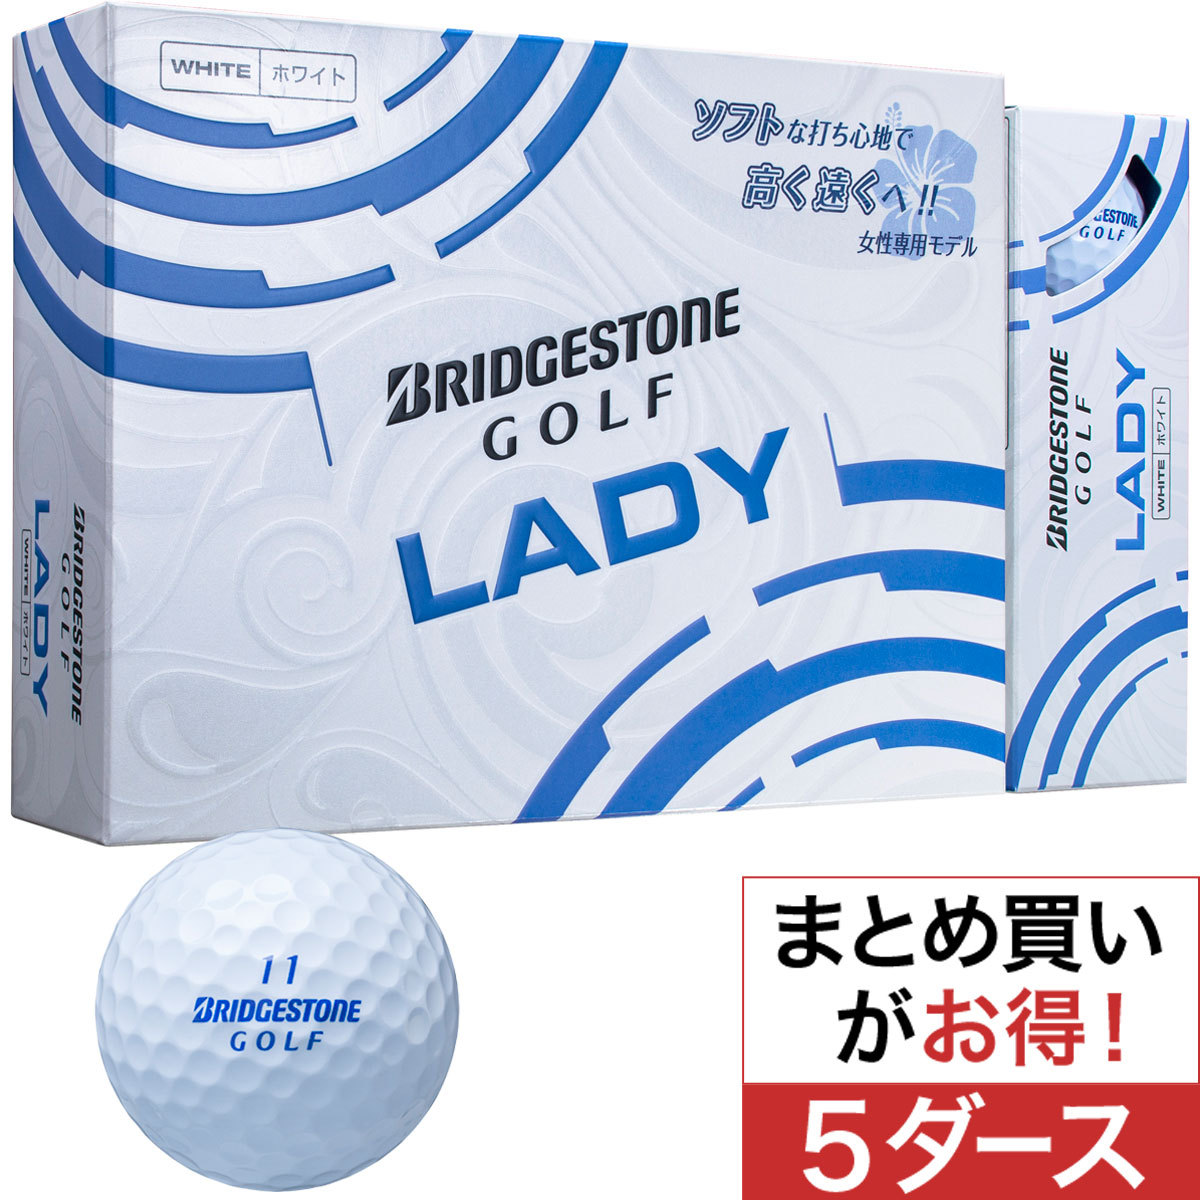  LADYボール 5ダースセット レディス